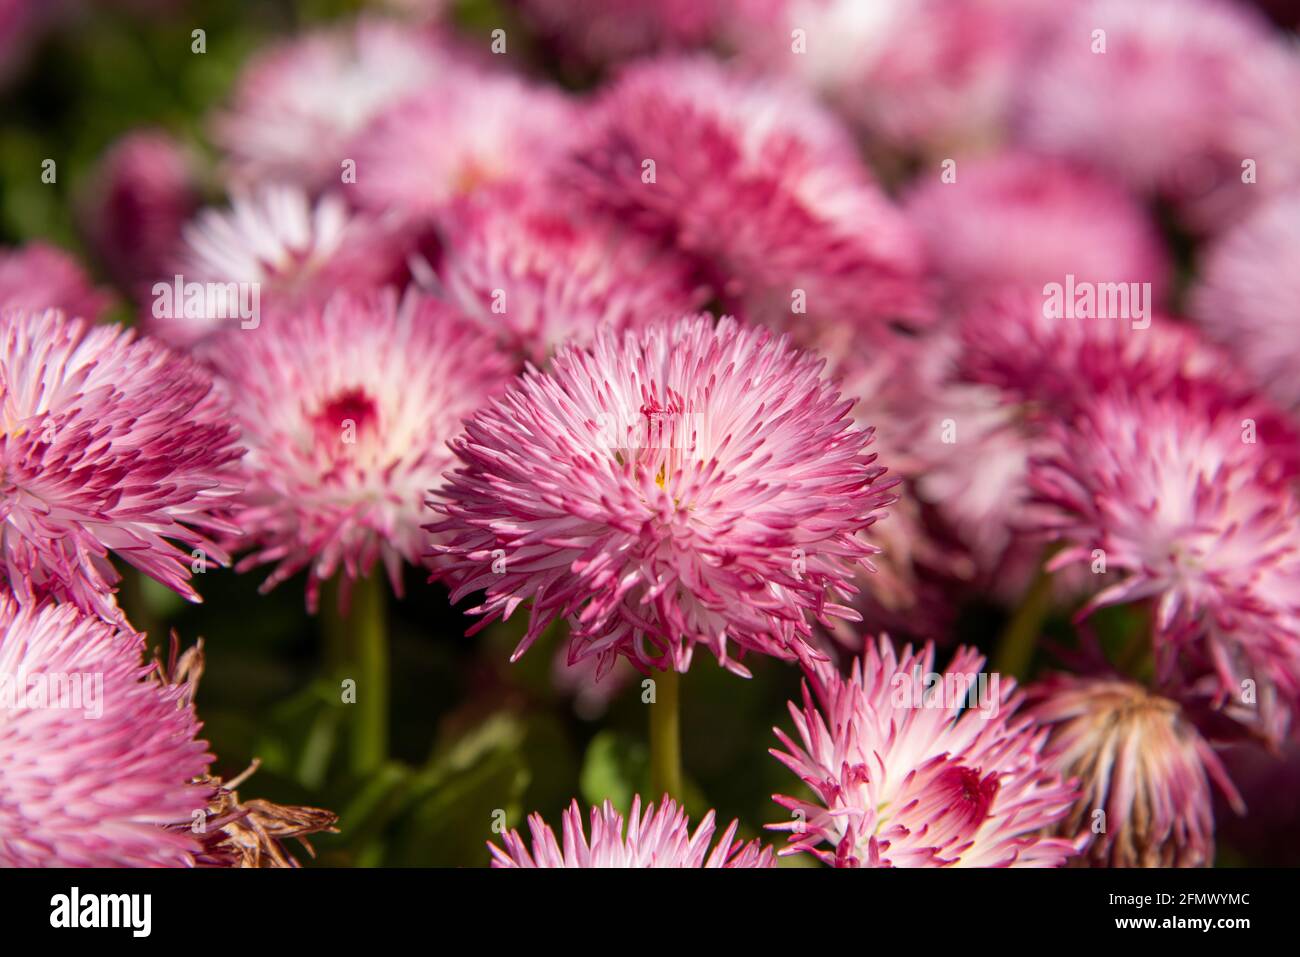 Pink Daisy flowers blossom in the garden Stock Photo